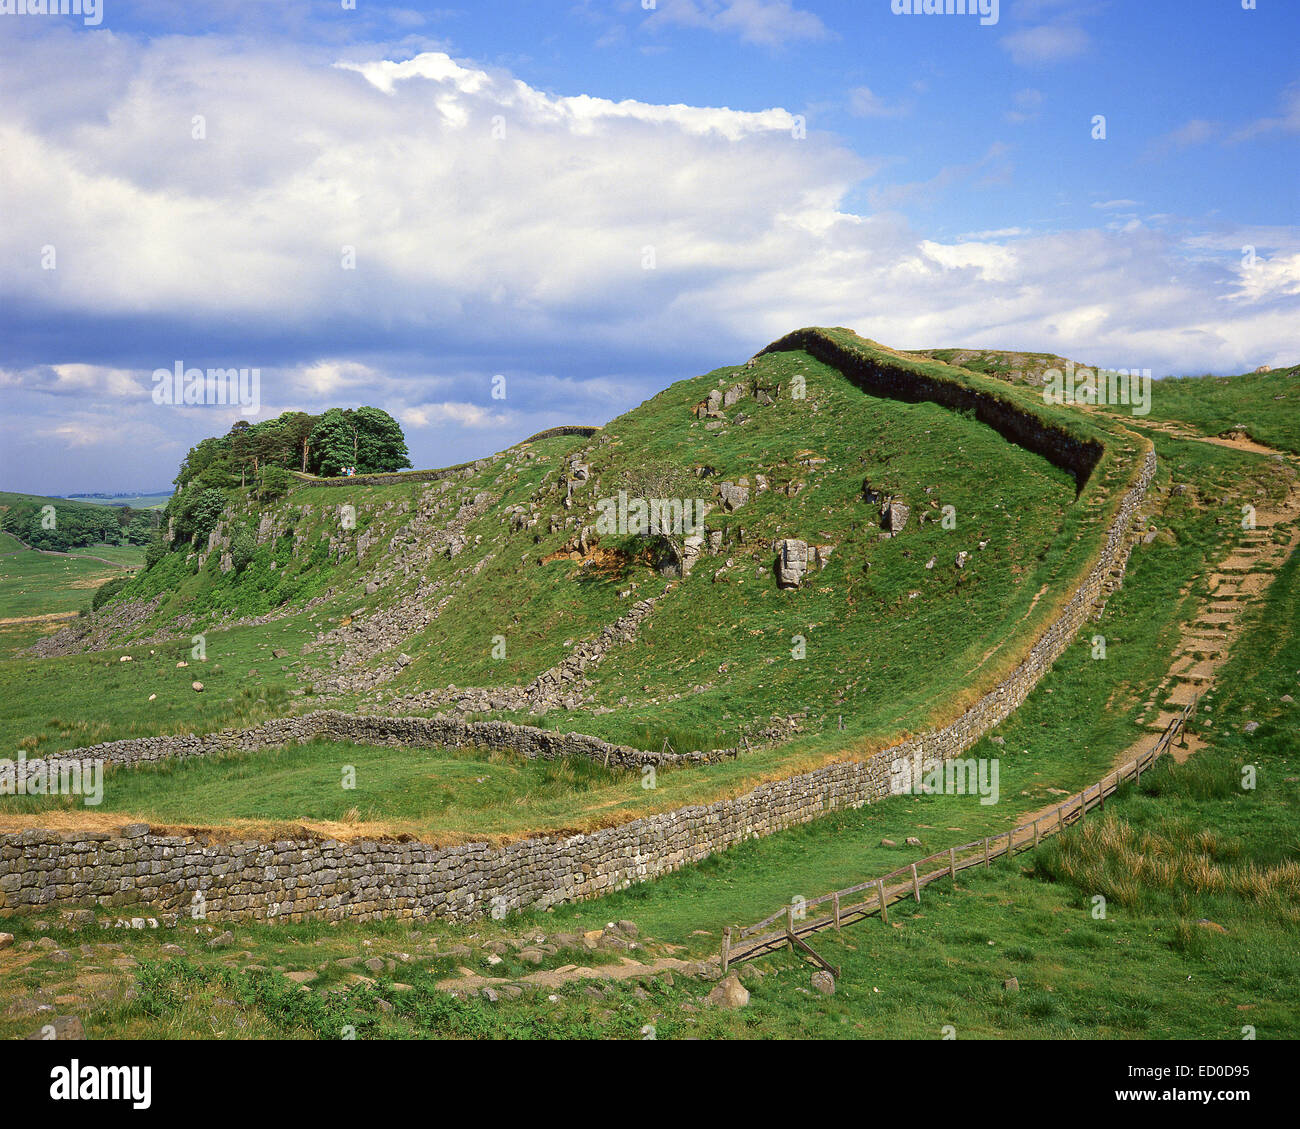 Mur d'Hadrien, Northumberland National Park, Northumberland, Angleterre, Royaume-Uni Banque D'Images